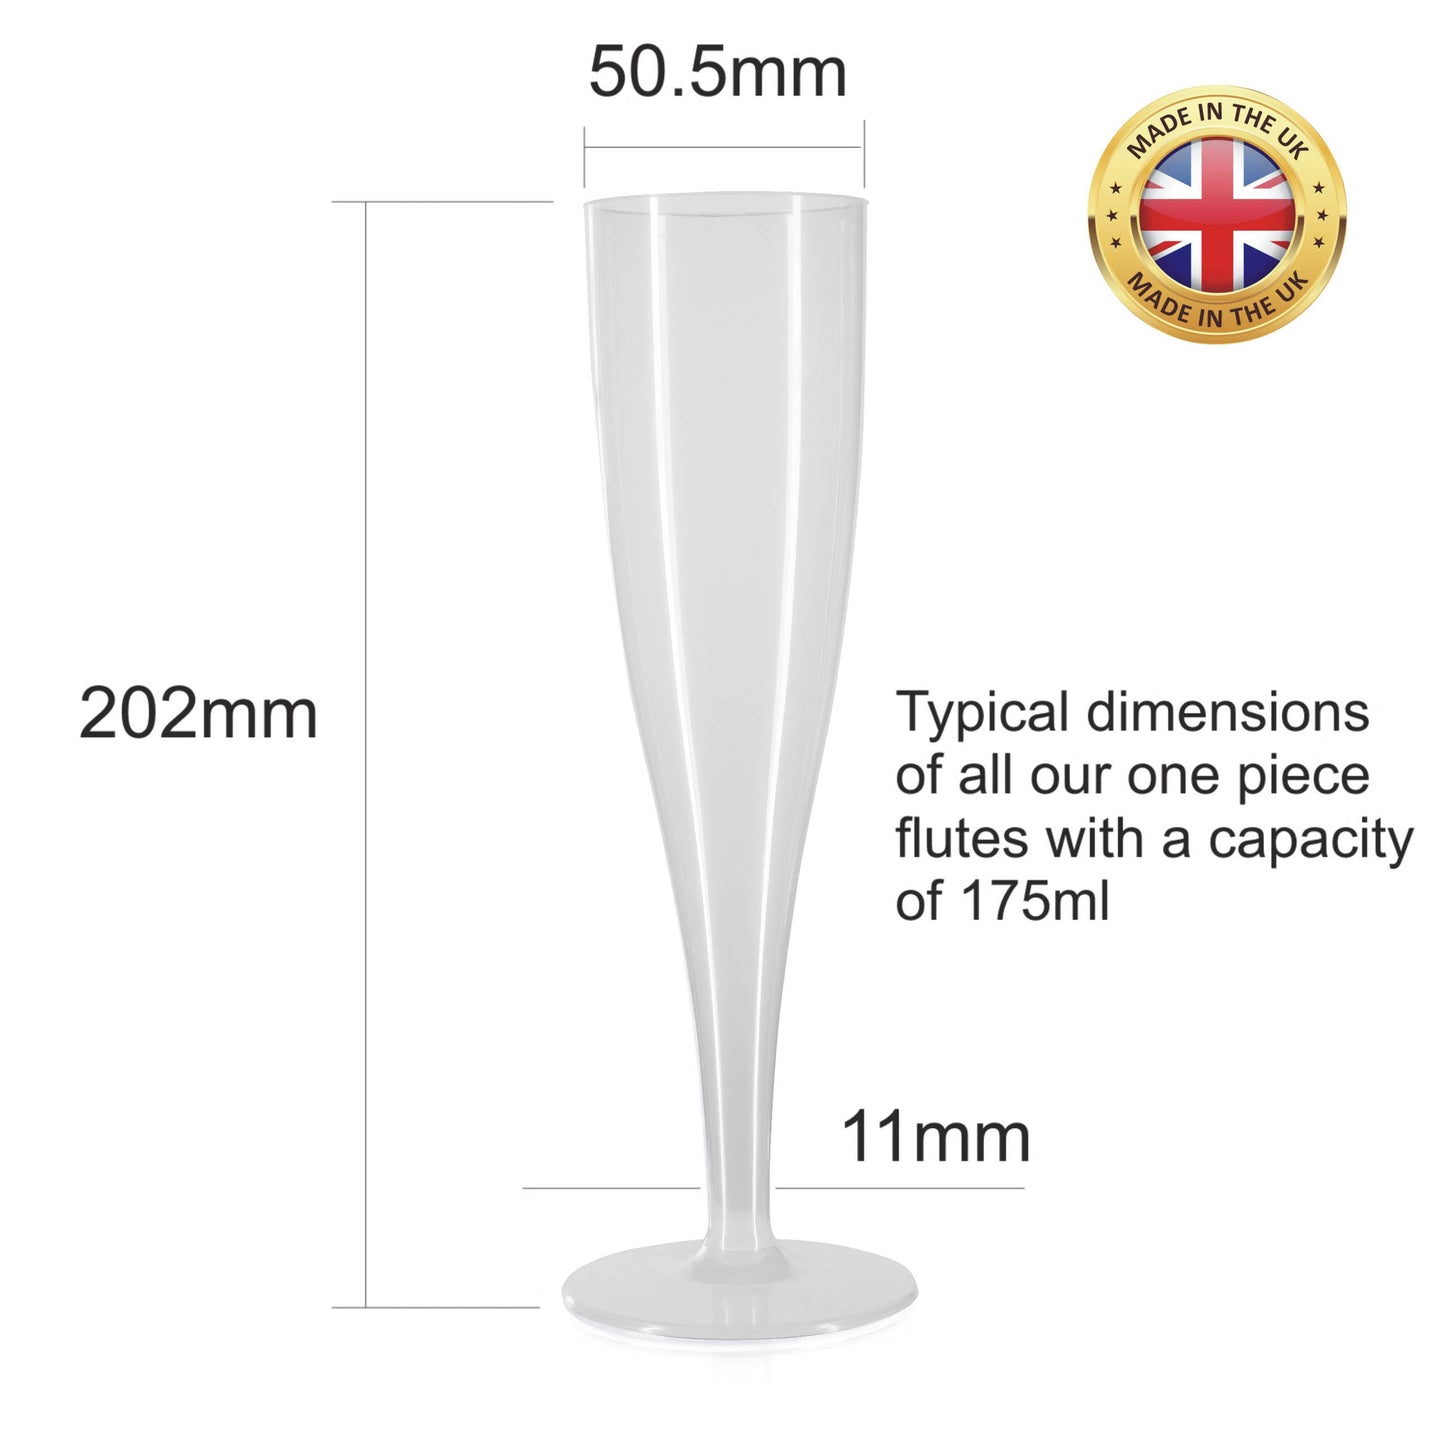 100 x White Prosecco Flutes – Biodegradable Material - Disposable – Glossy Bright White Prosecco Glass - One Piece – Pack of 100-5056020182993-EY-PP-016-Product Pro-Champagne Flute, Champagne Glasses, Flutes, Prosecco Flute, Prosecco Glasses, White Flutes